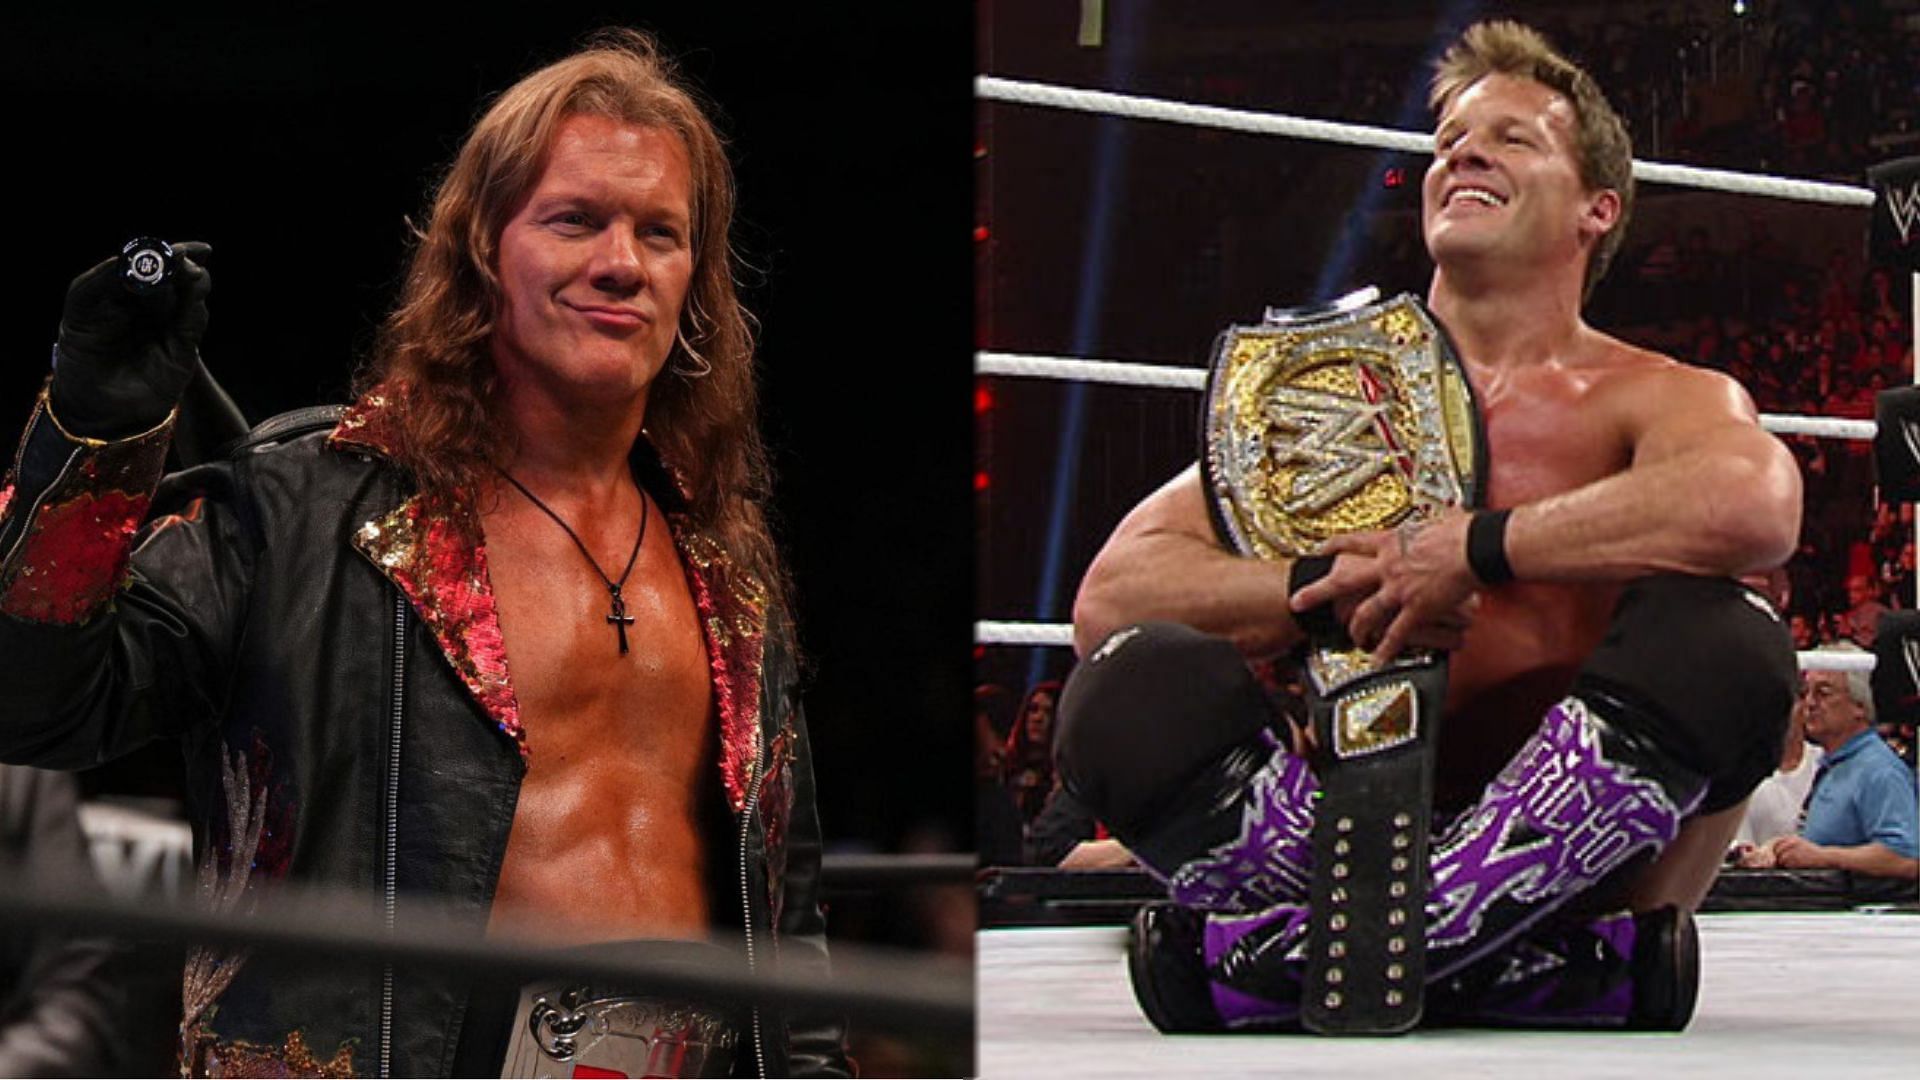 Chris Jericho is truly a master of reinvention.